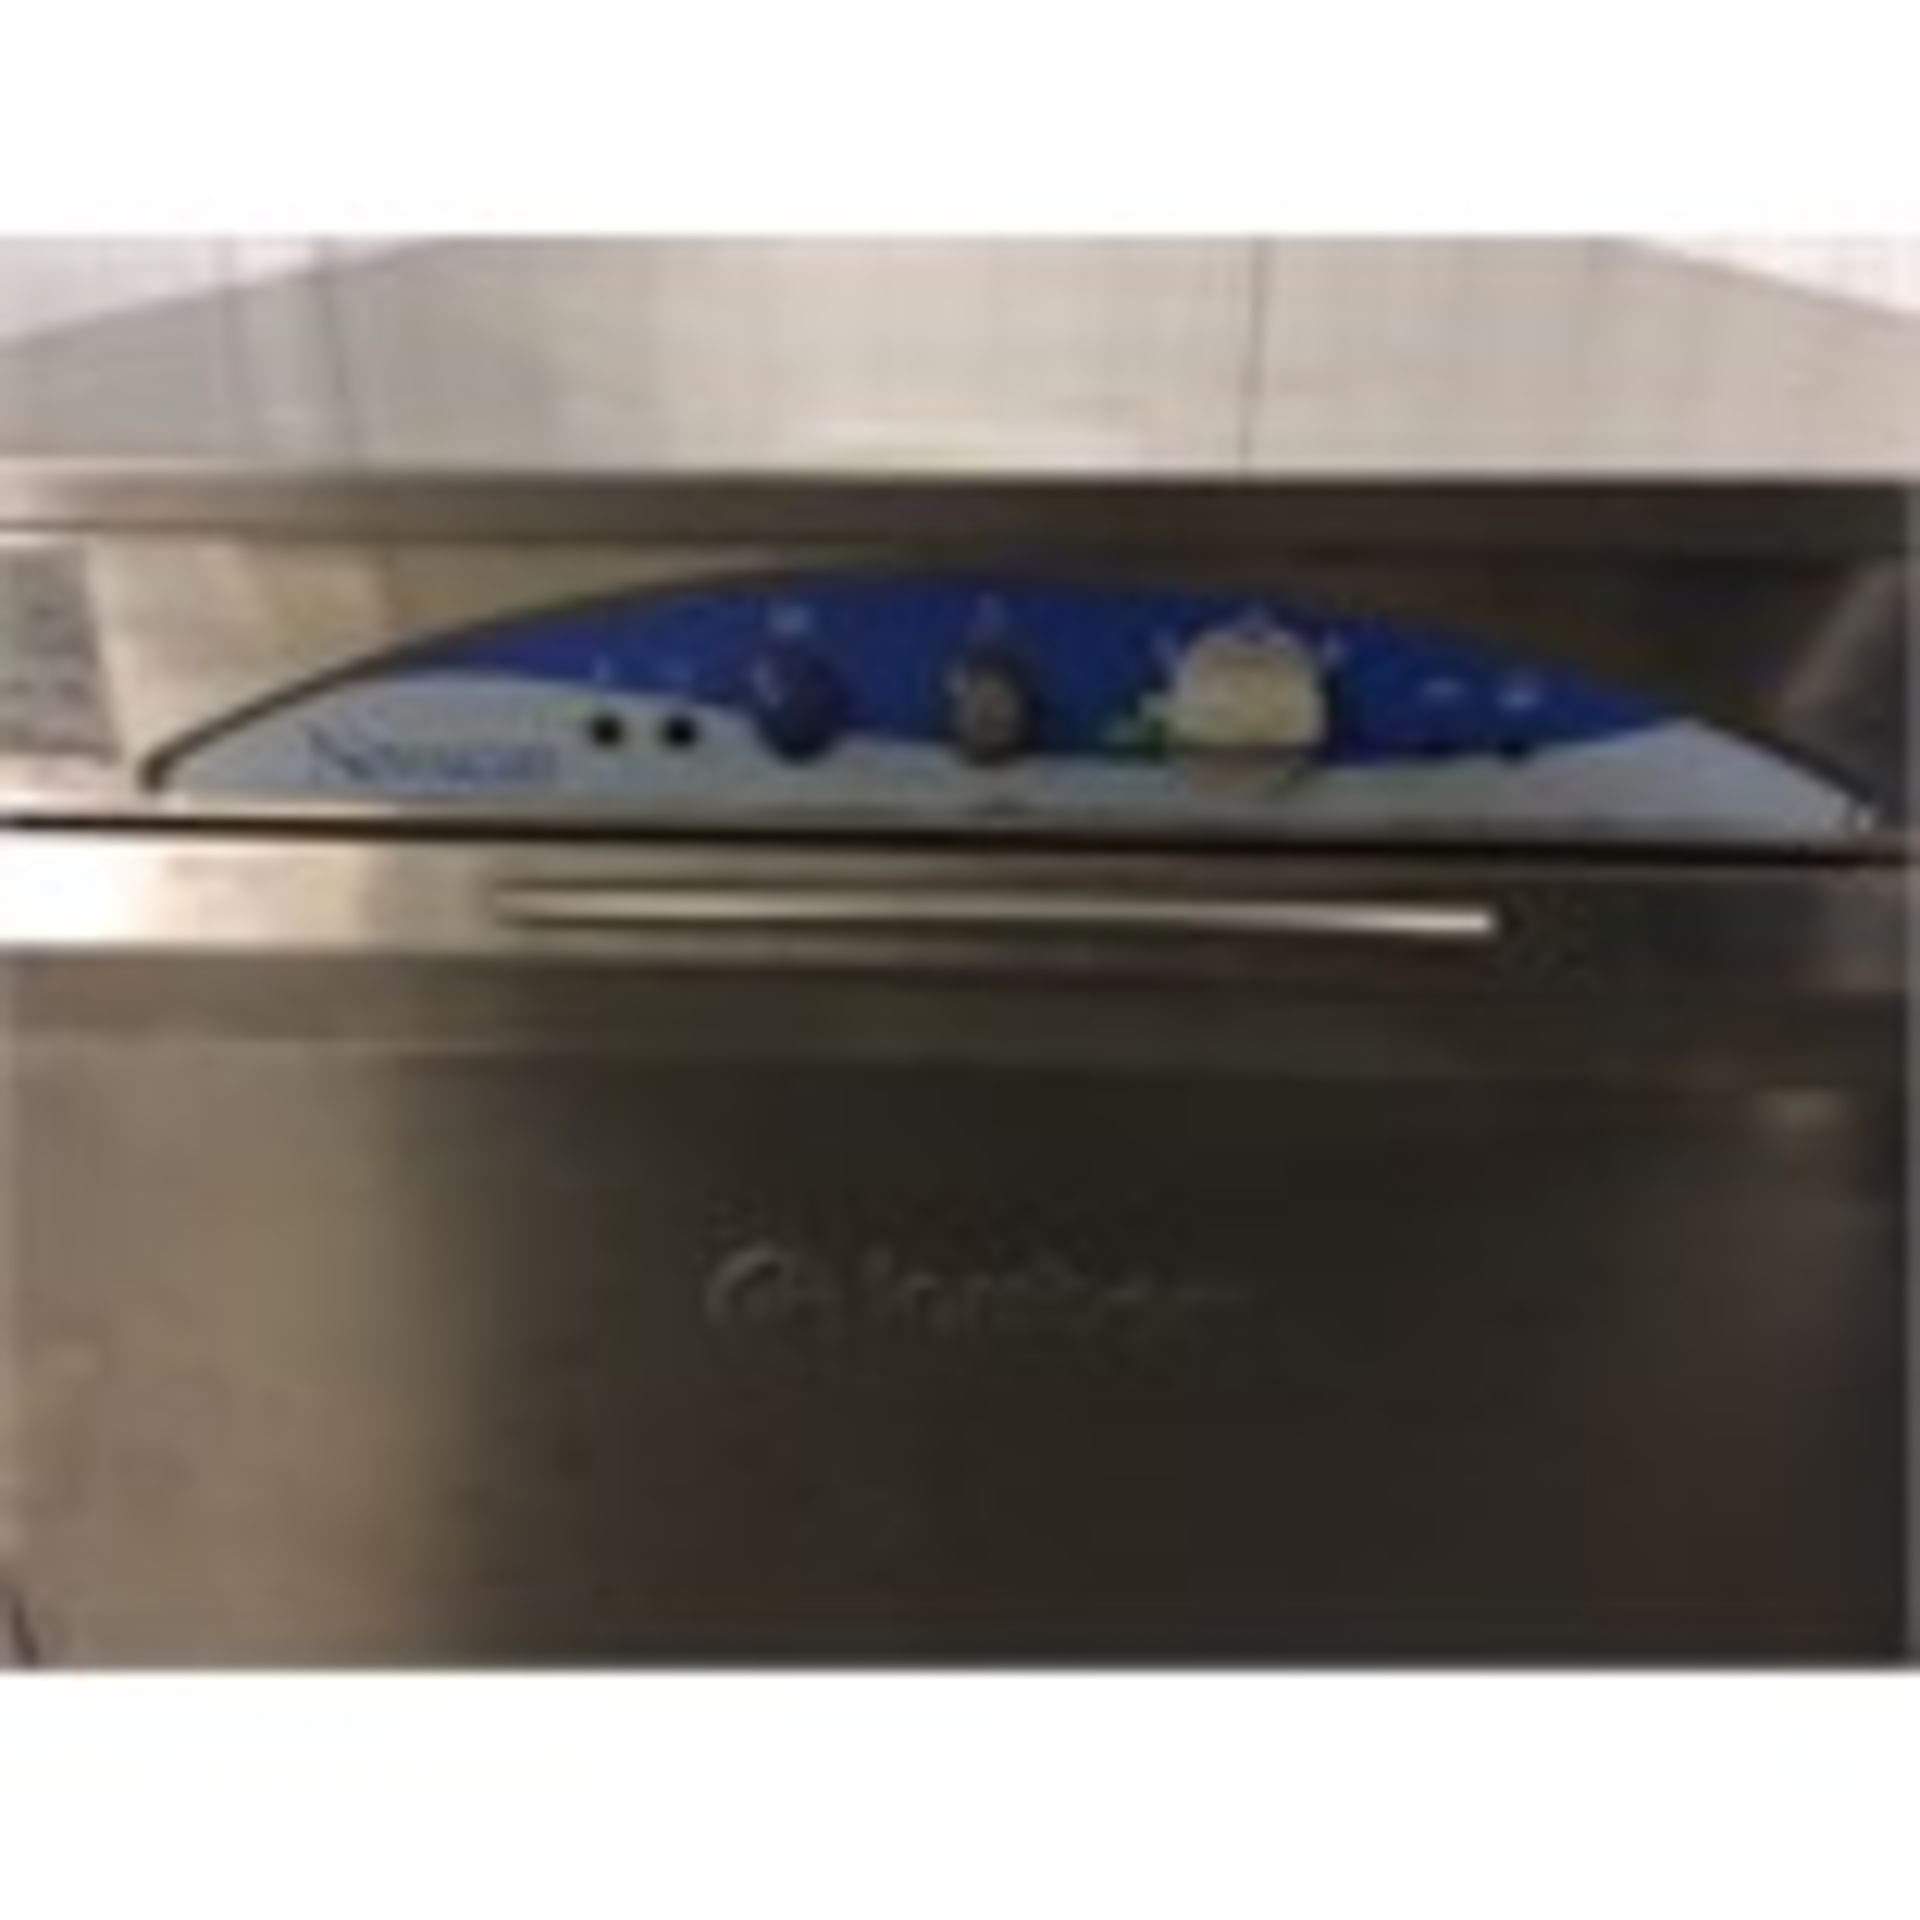 Lamber newsman dishwasher "As New"LIFT OUT £10 - Image 2 of 3